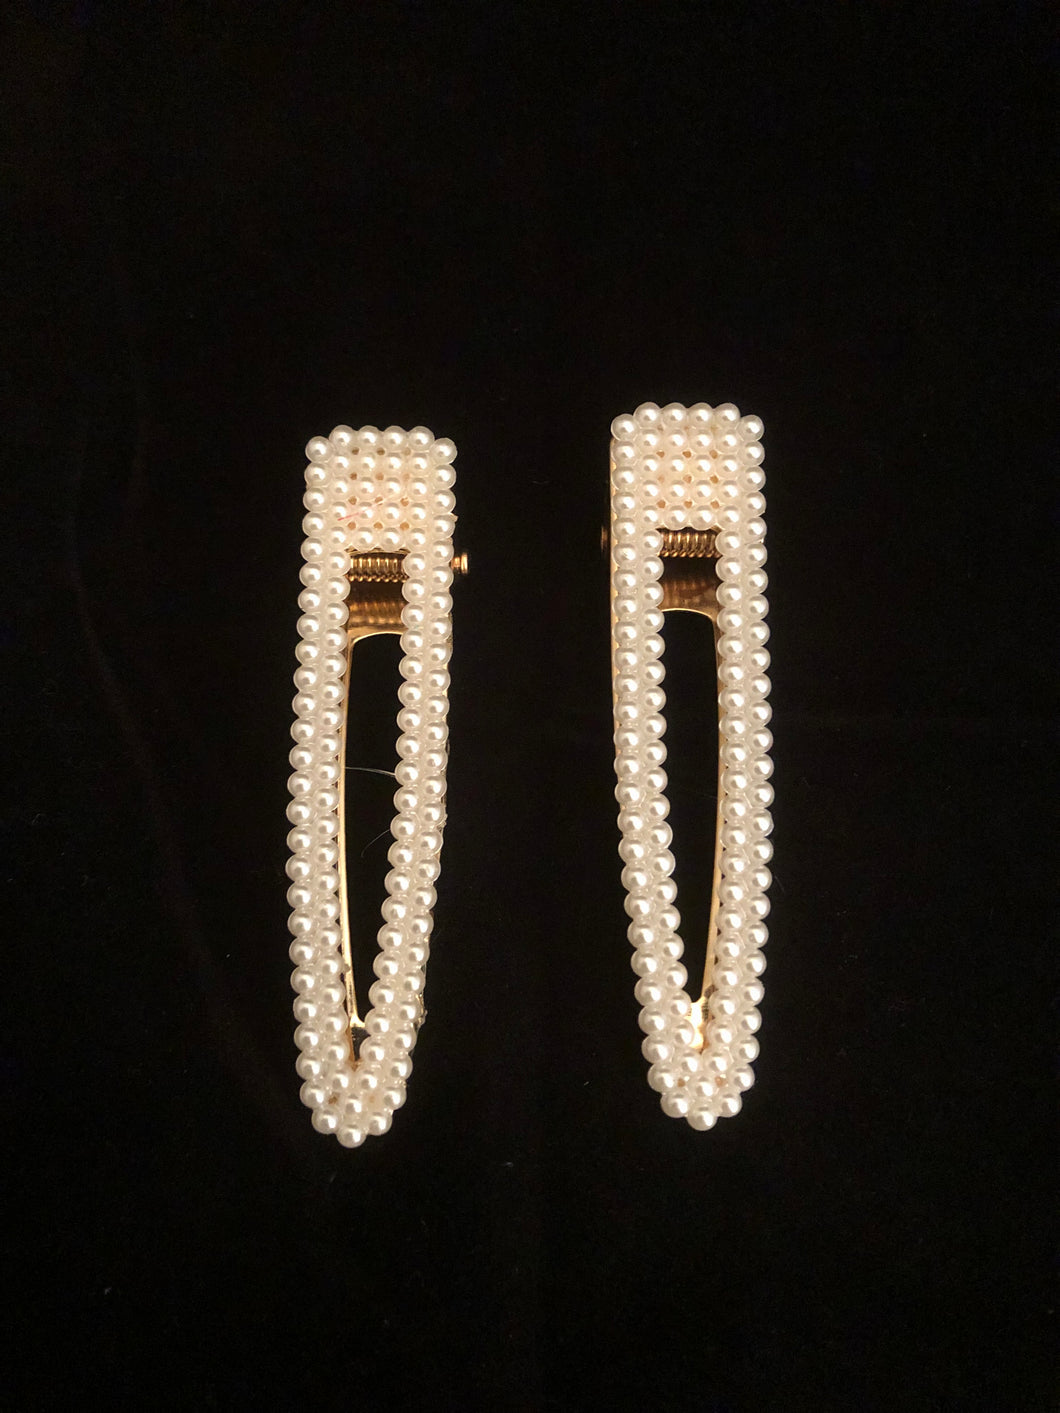 THE VIVIENNE CLIP-Style #2 (2 PACK)